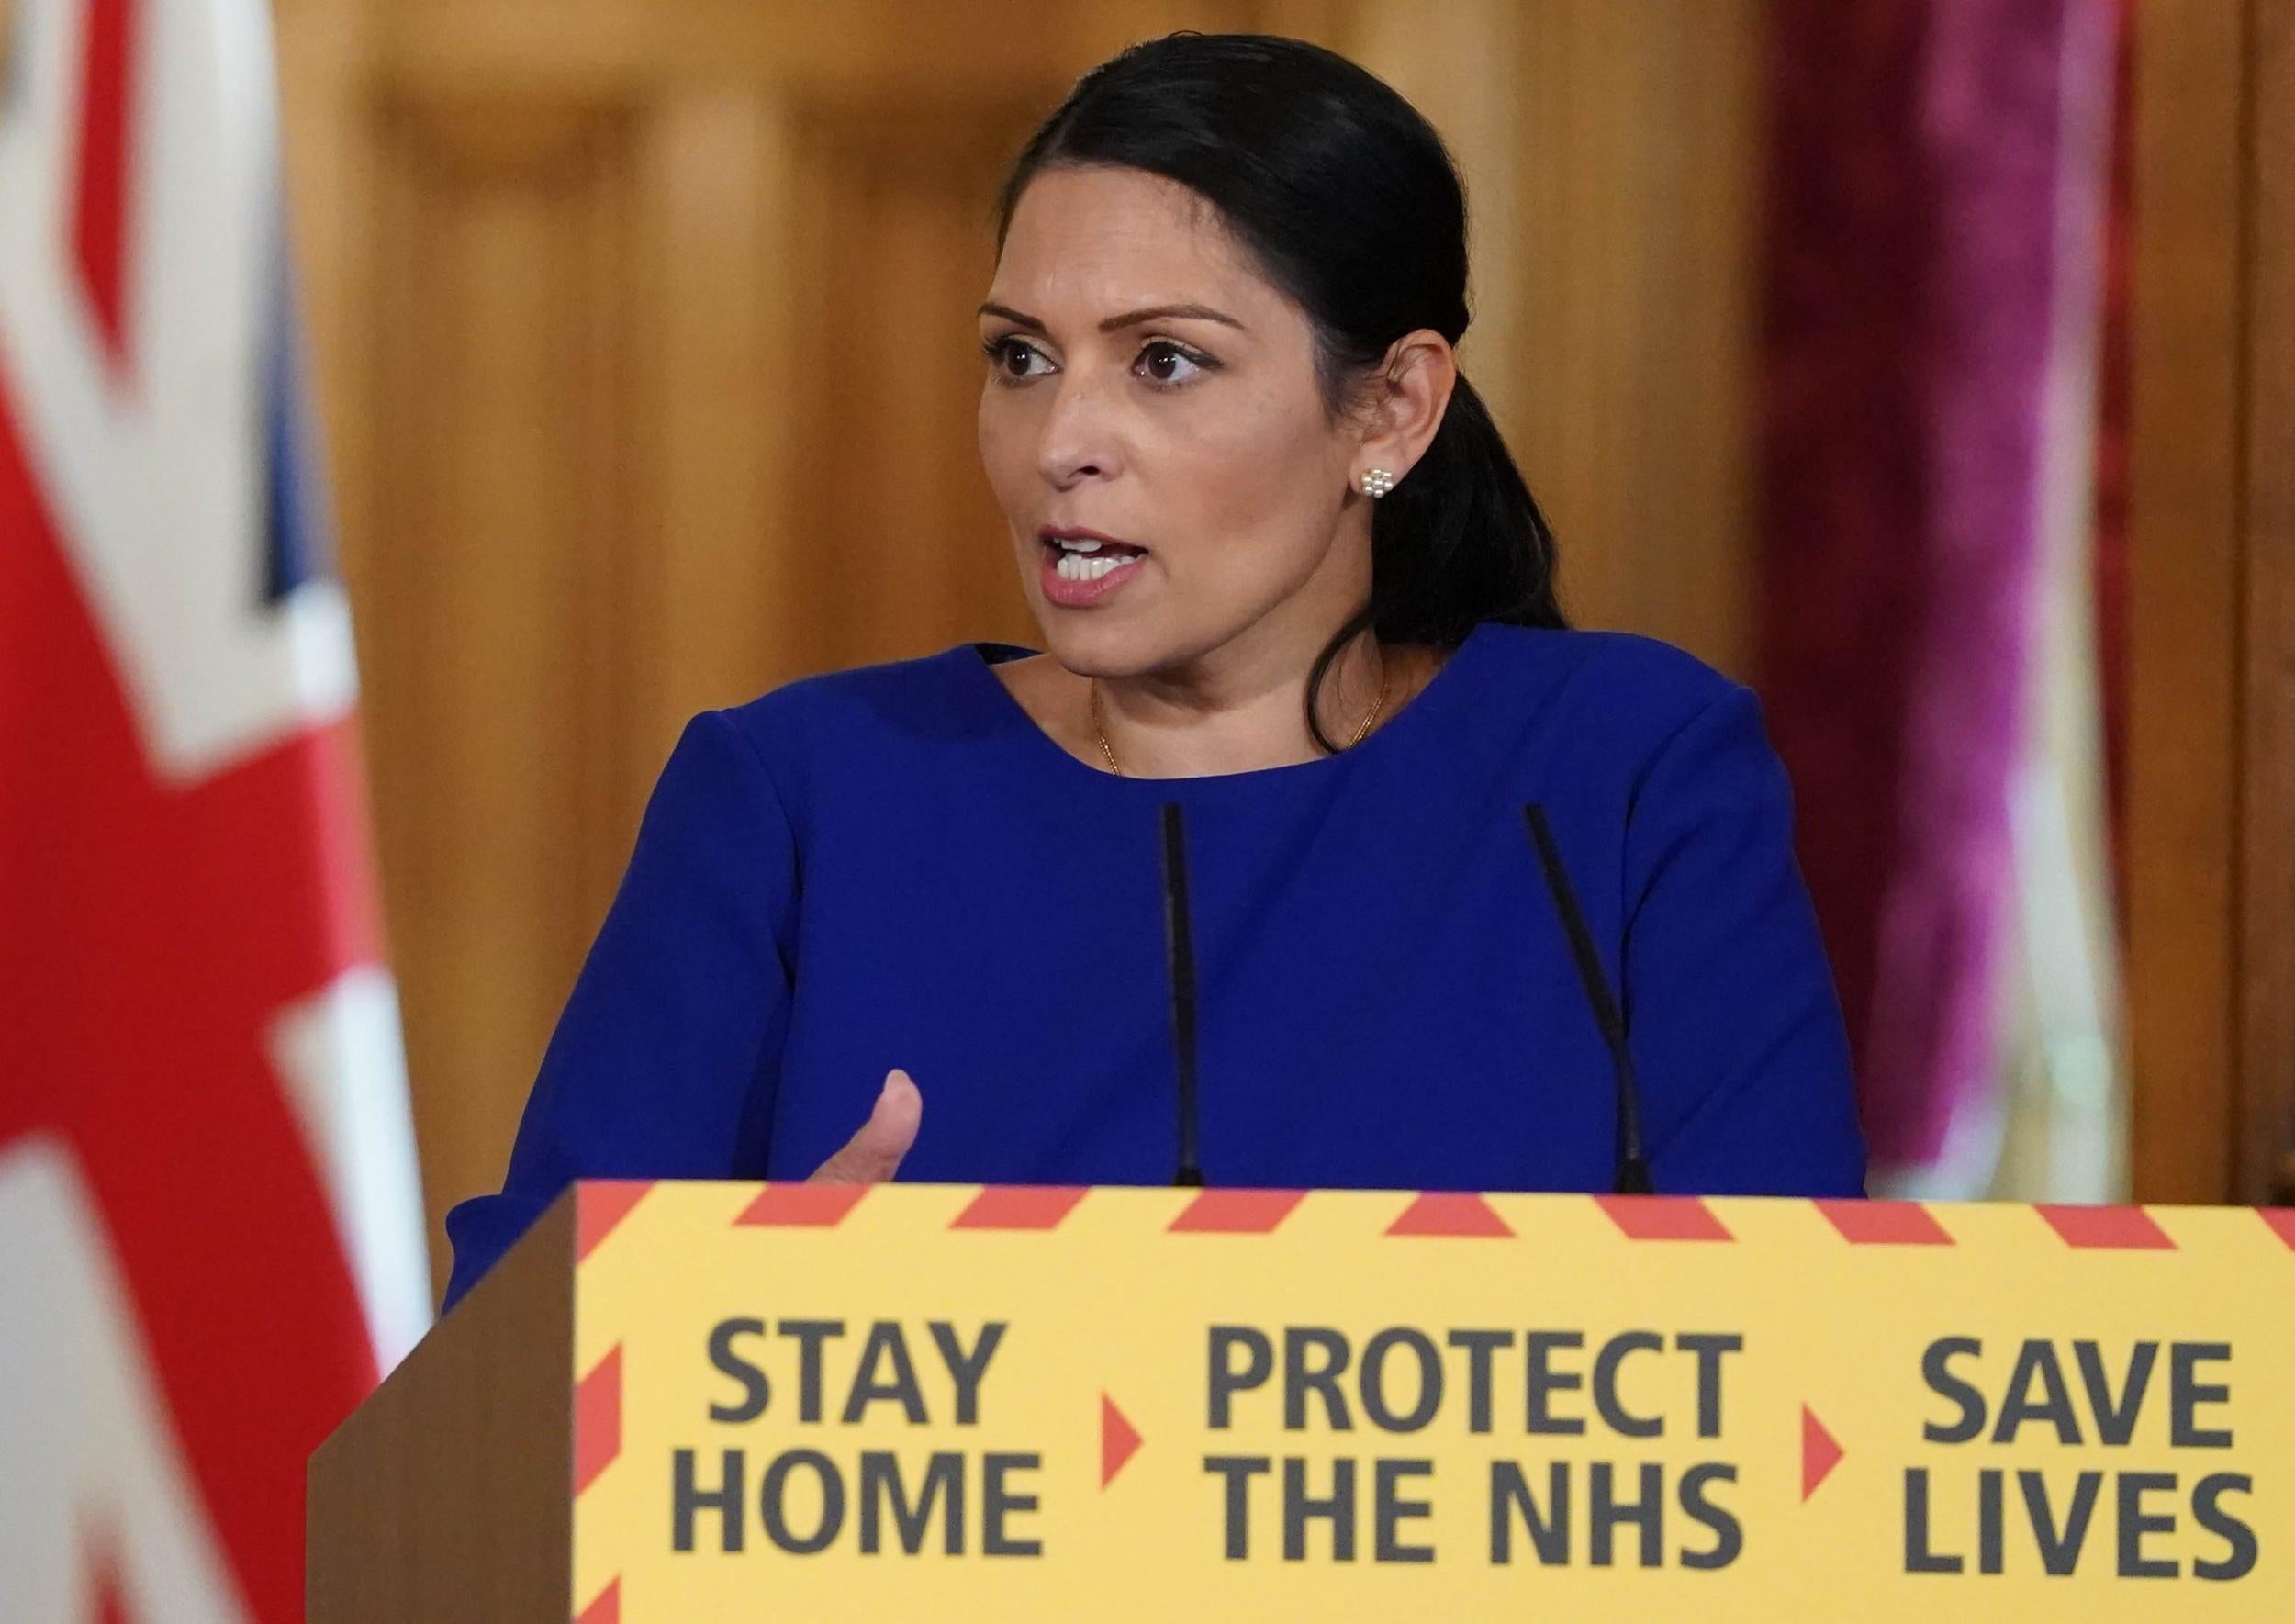 Related video: Priti Patel says there will be ‘new norms’ for British society after lockdown